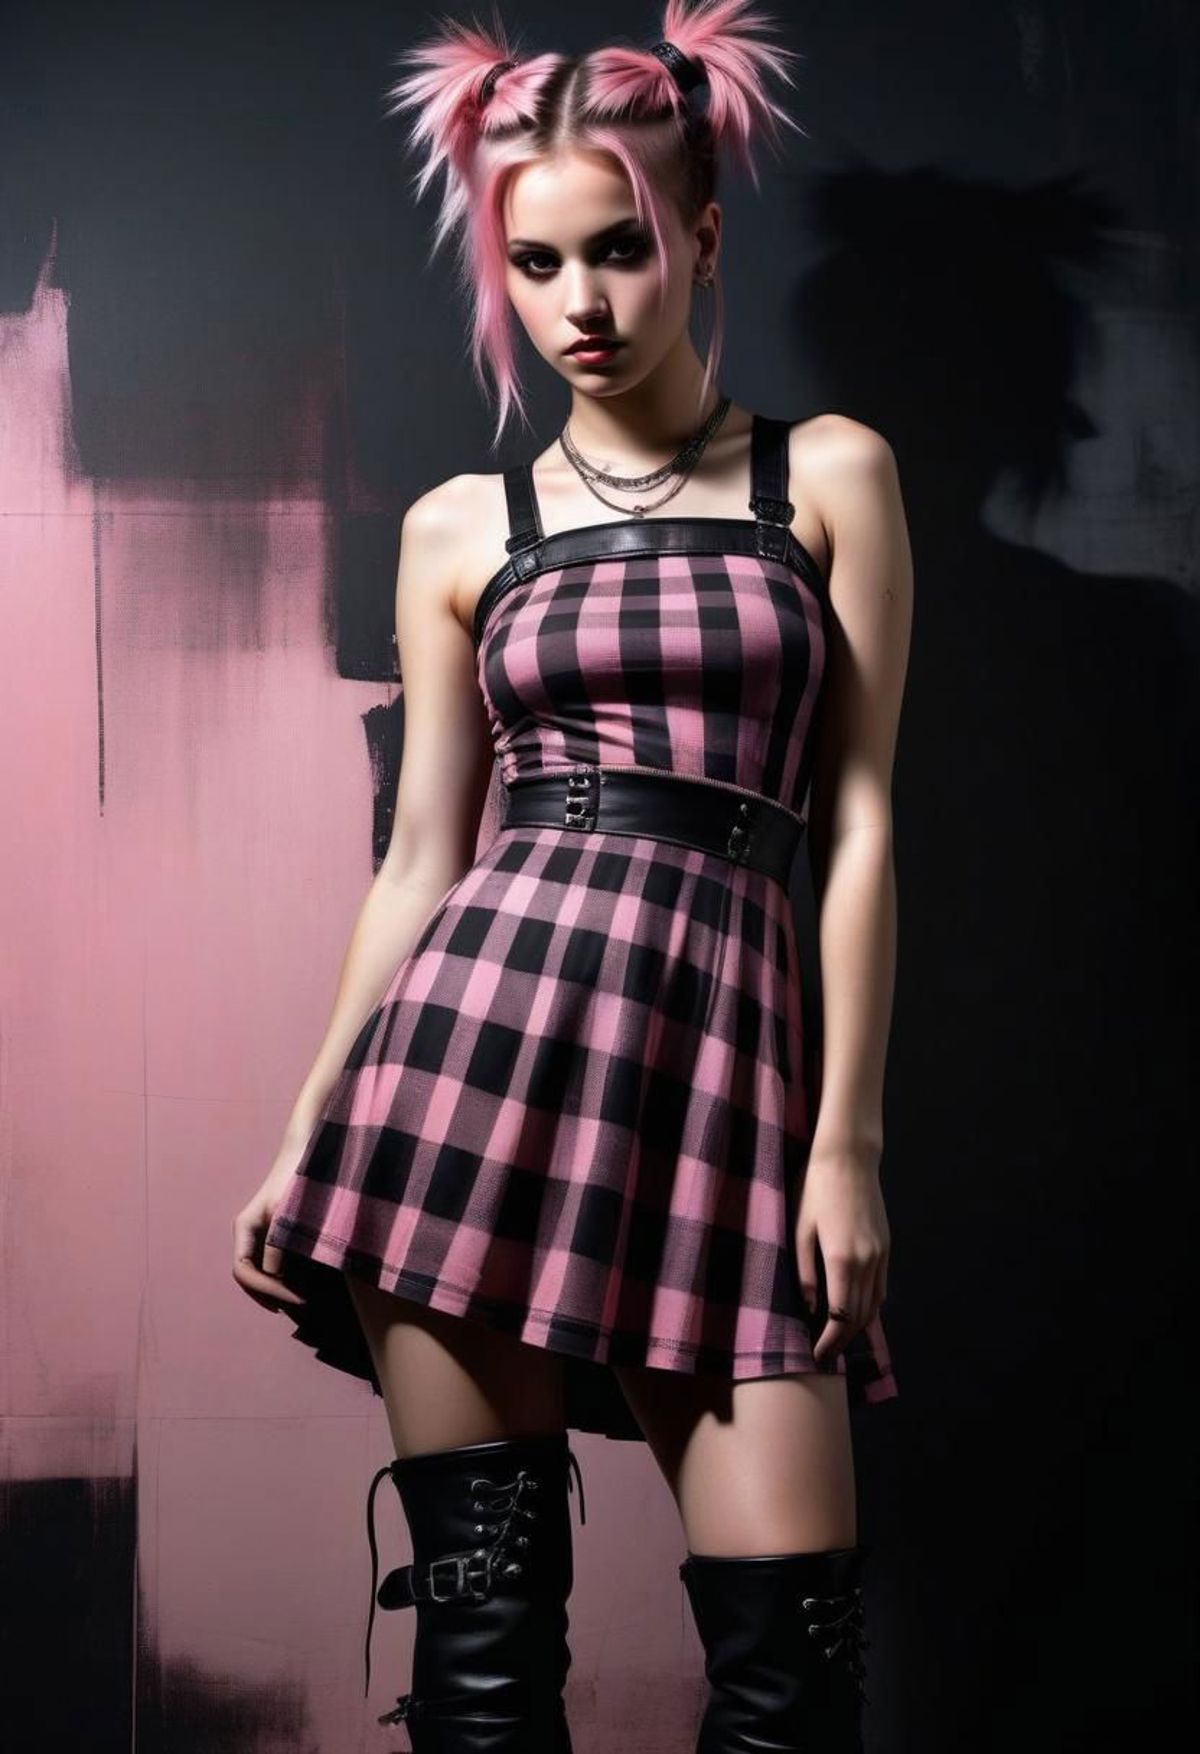 A woman wearing a pink and black checkered dress and black boots poses for the camera.